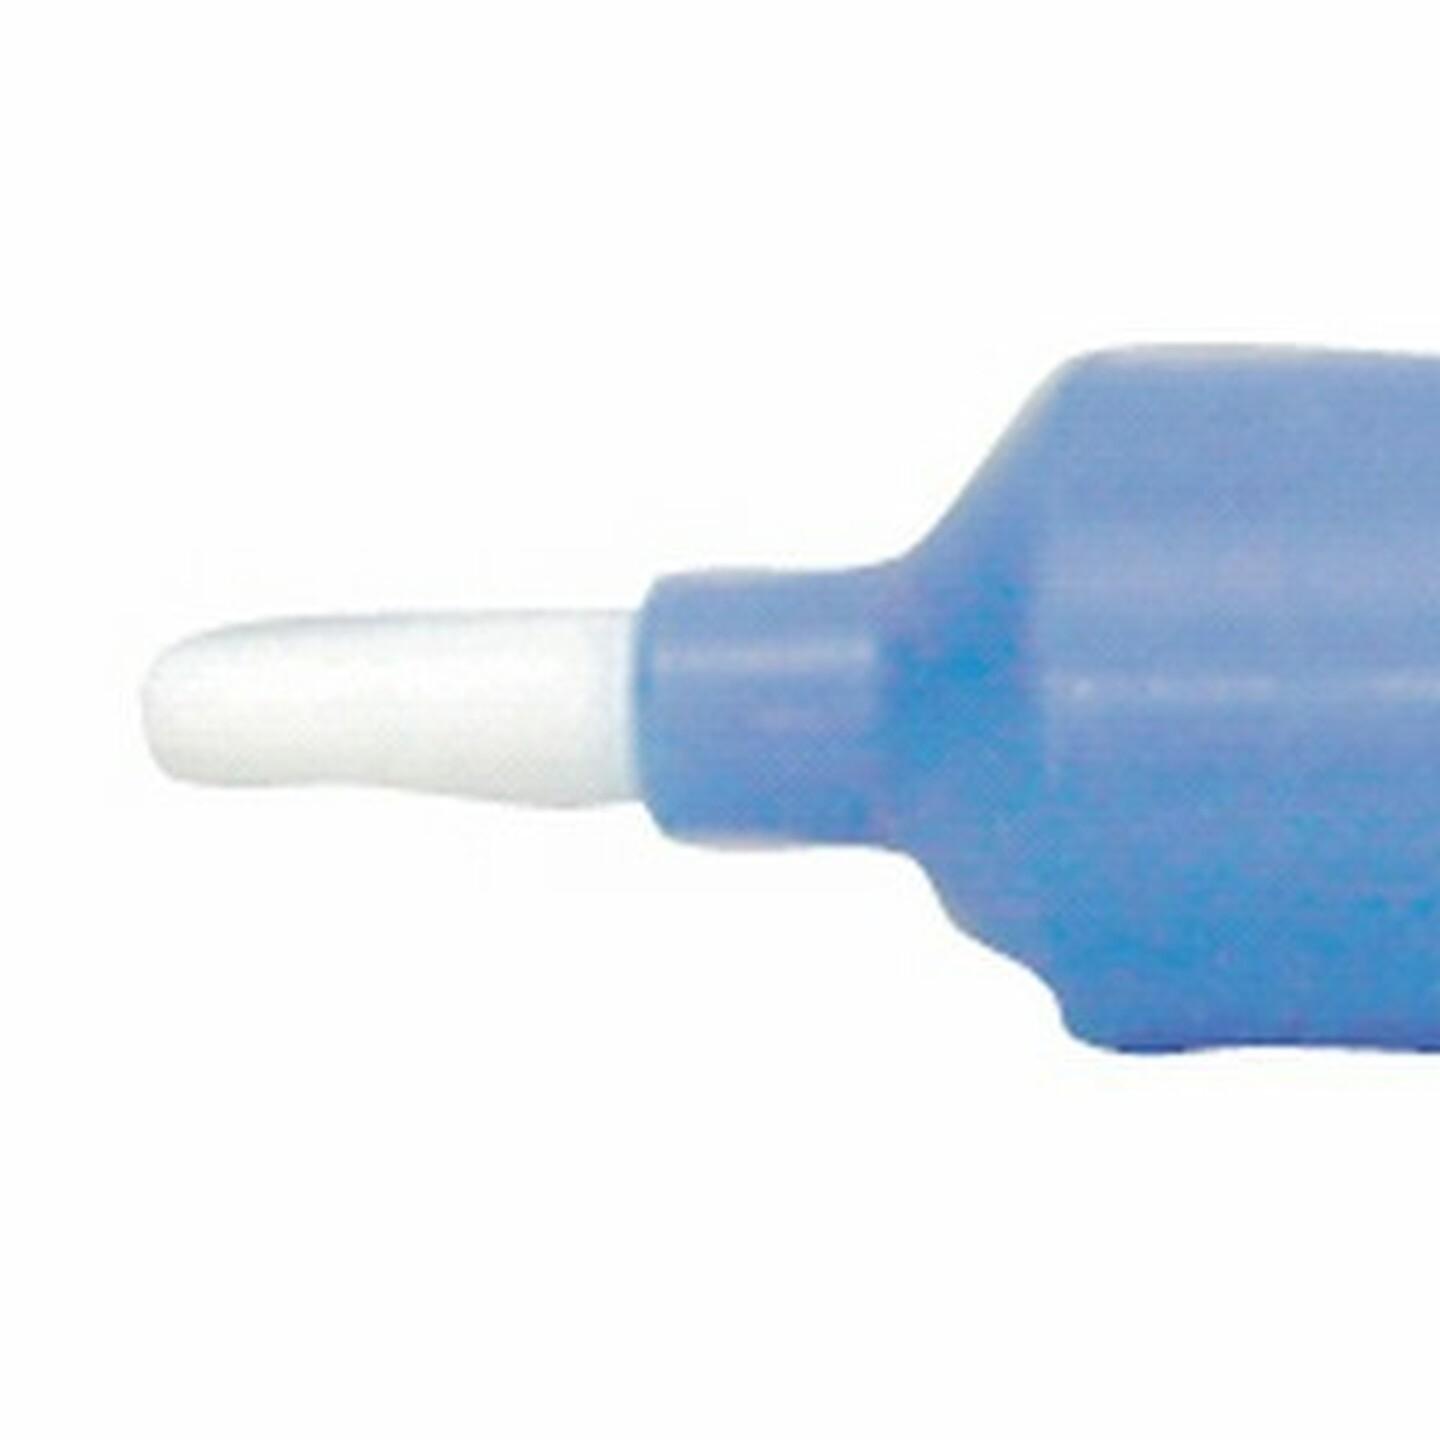 Replacement tip to suit TH1860 Desolder Tool